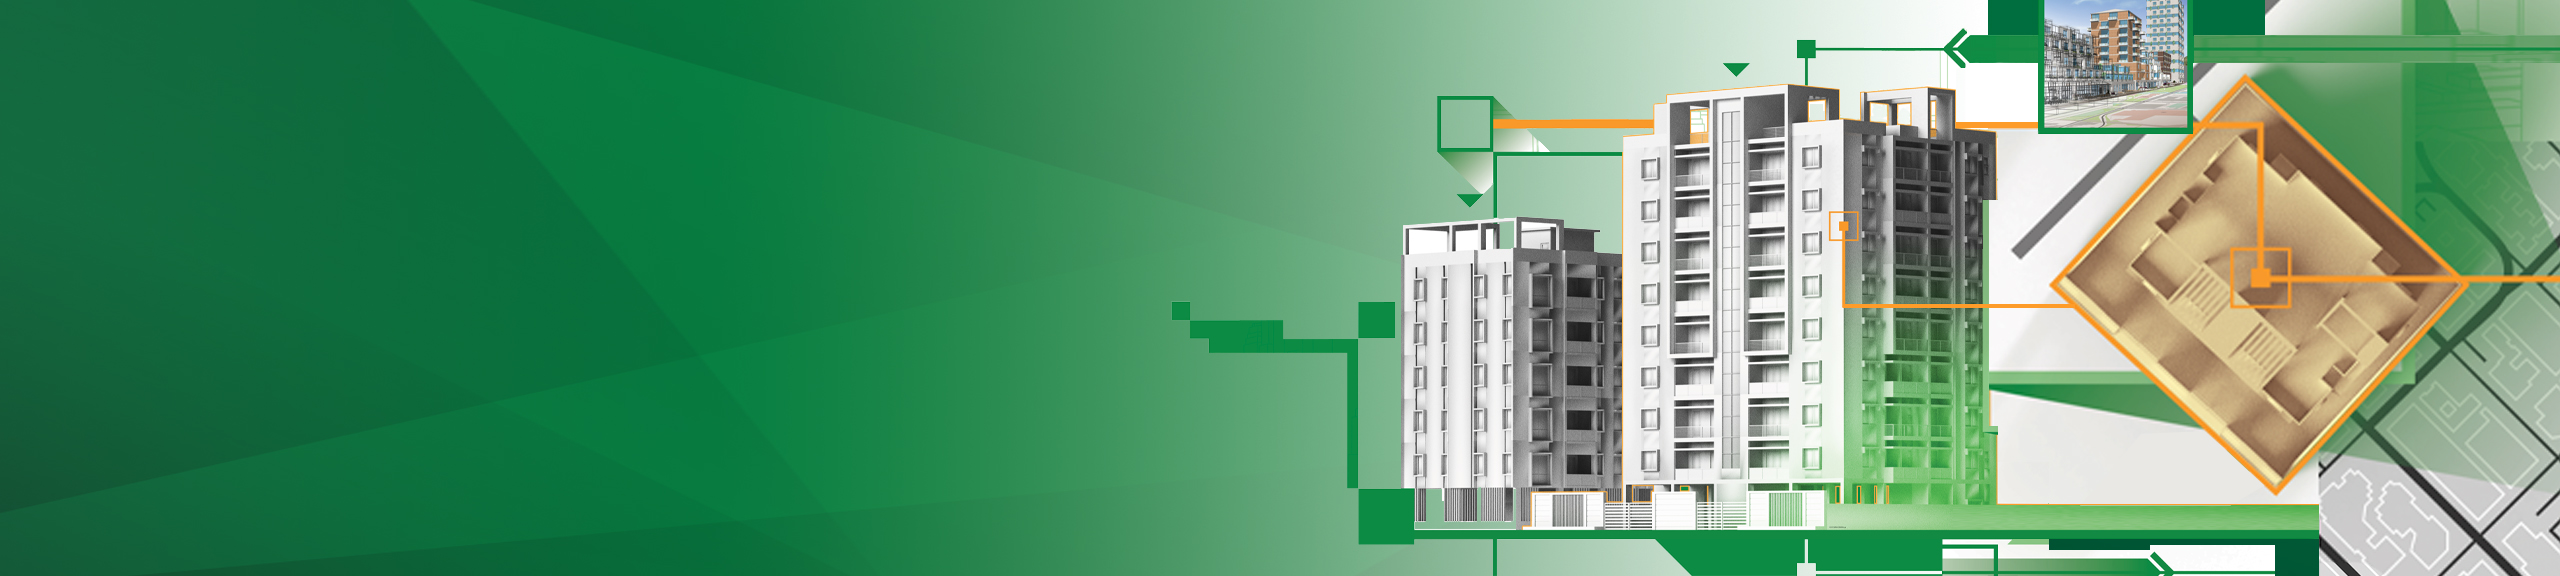 A 3D model of two multistory apartment buildings.